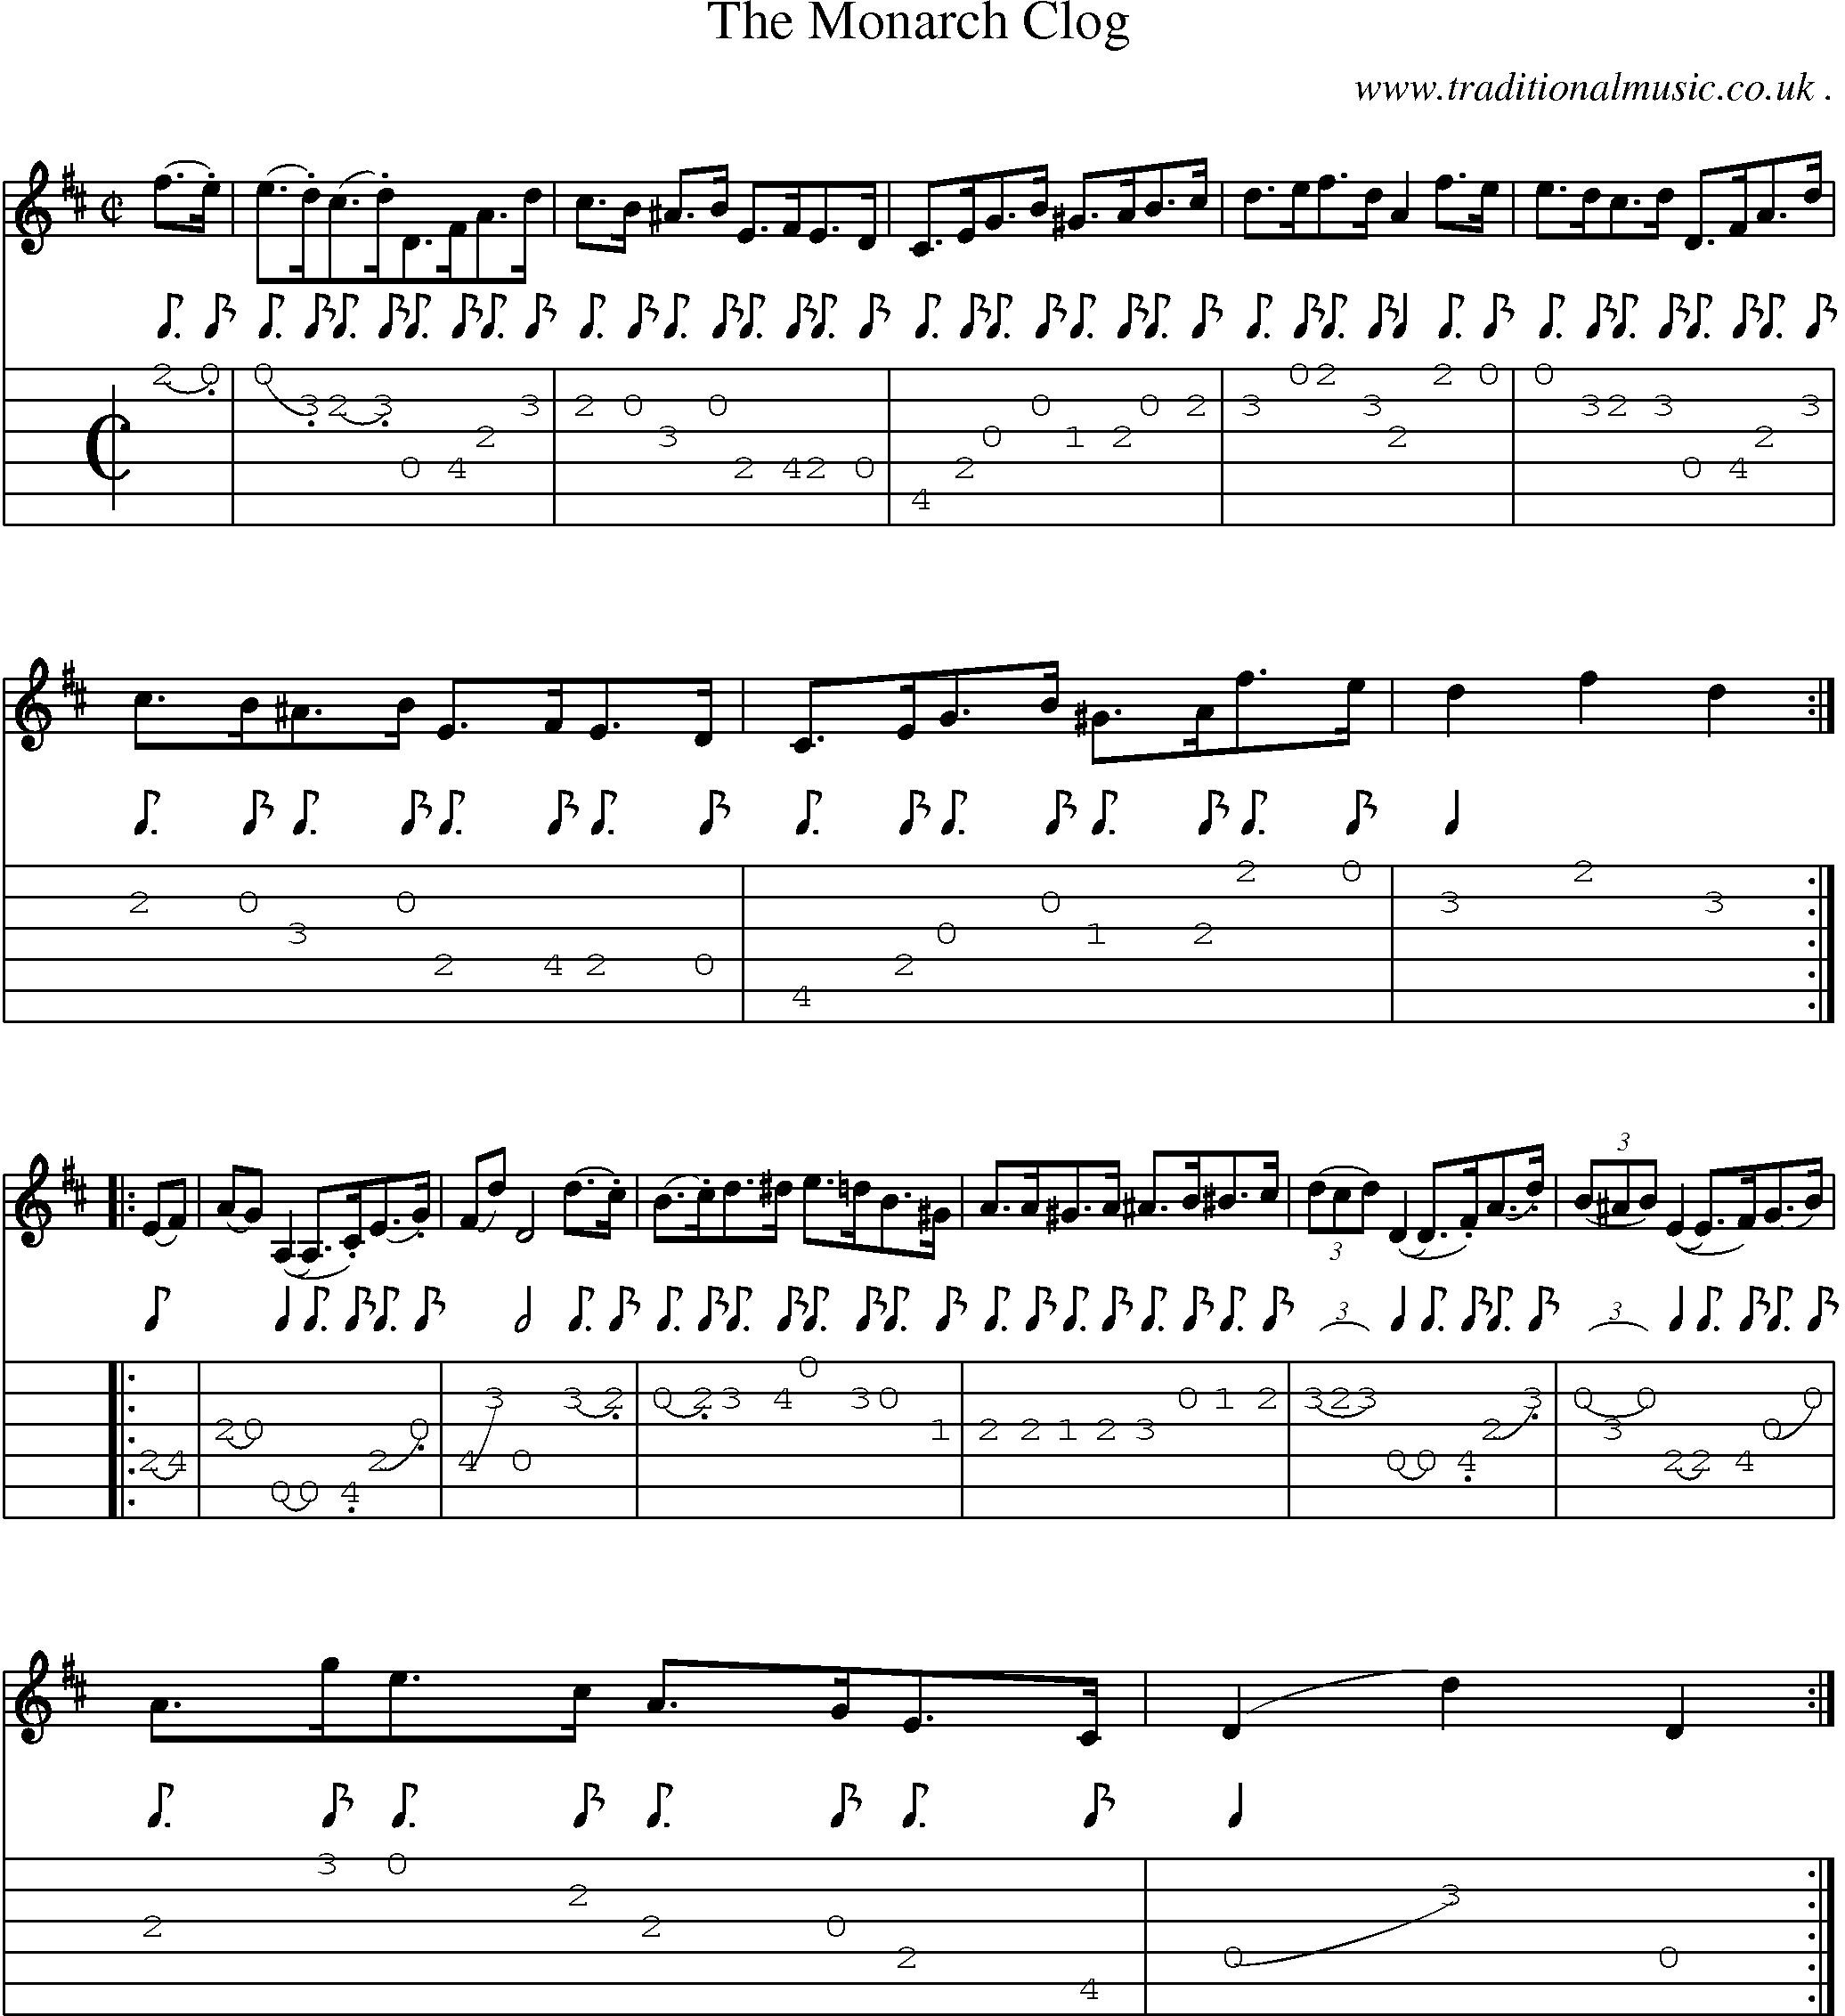 Sheet-Music and Guitar Tabs for The Monarch Clog